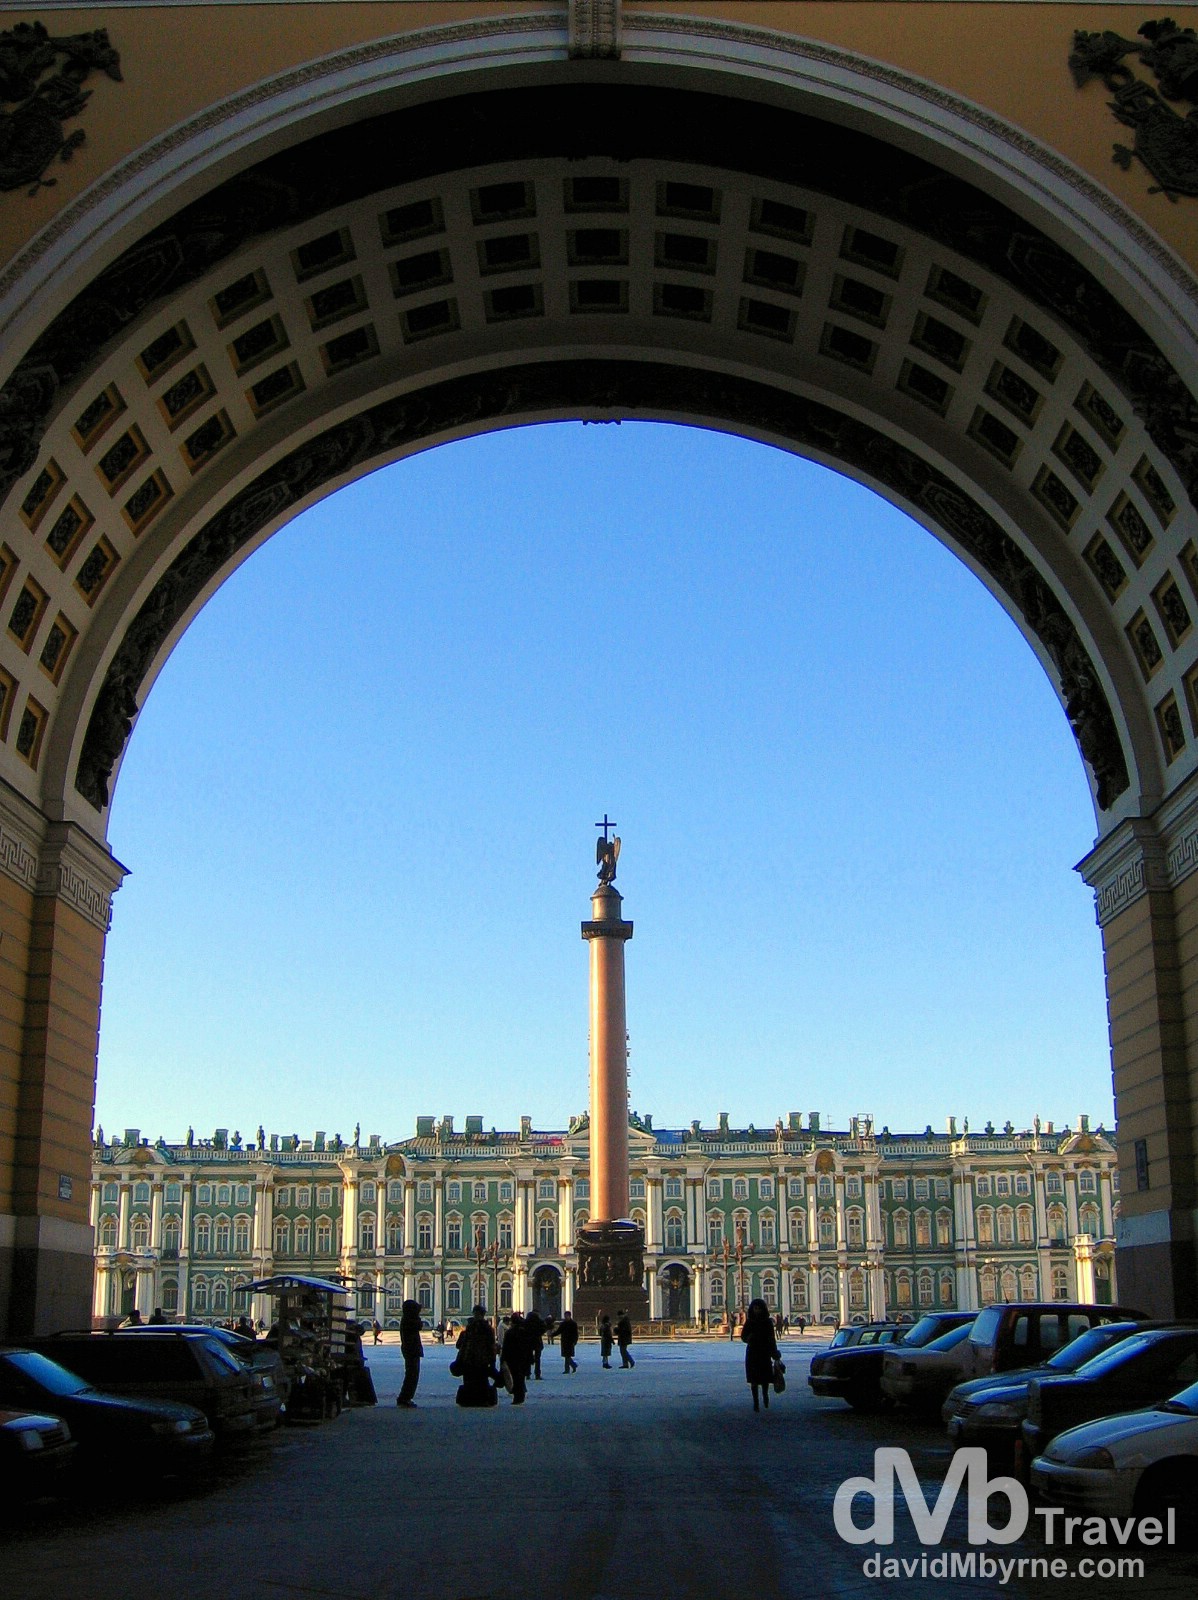 Palace Square as seen from under the arches of the General Staff Building on Bol Morskaya ul in St Petersburg, Russia. February 27, 2006.